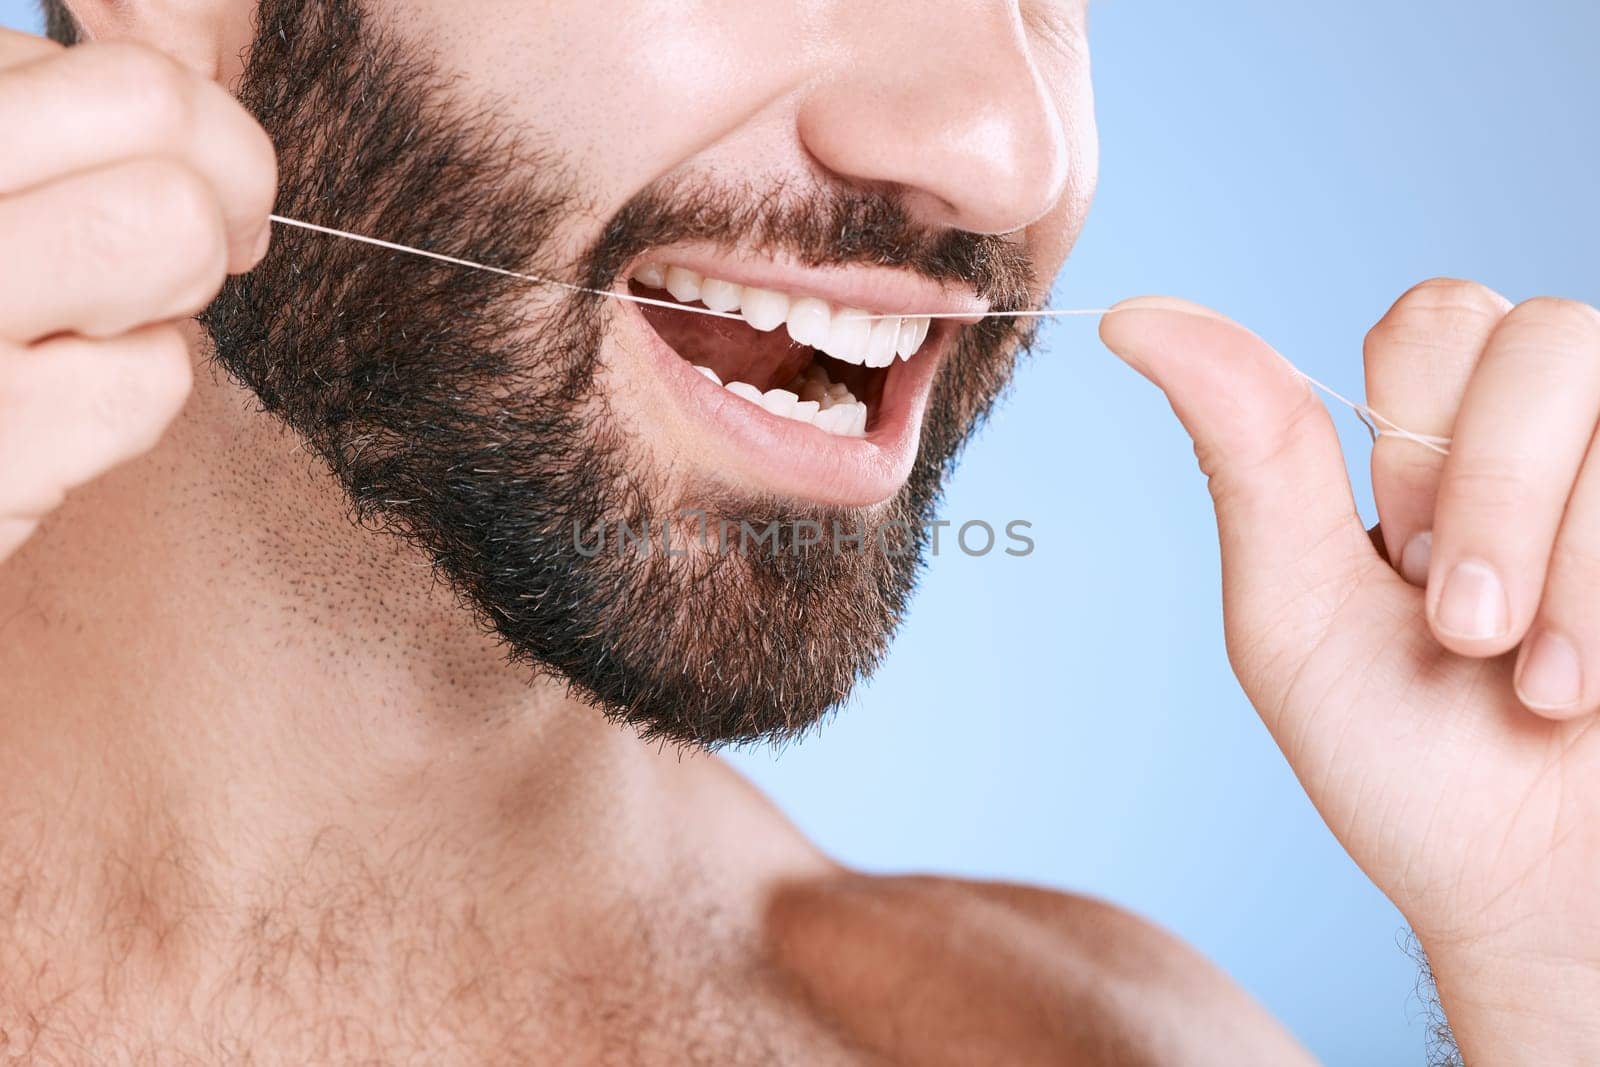 Dental, floss and oral hygiene with a man in studio on a blue background cleaning his teeth for healthy gums. Dentist, healthcare and mouth with a young male flossing to remove plague or gingivitis.